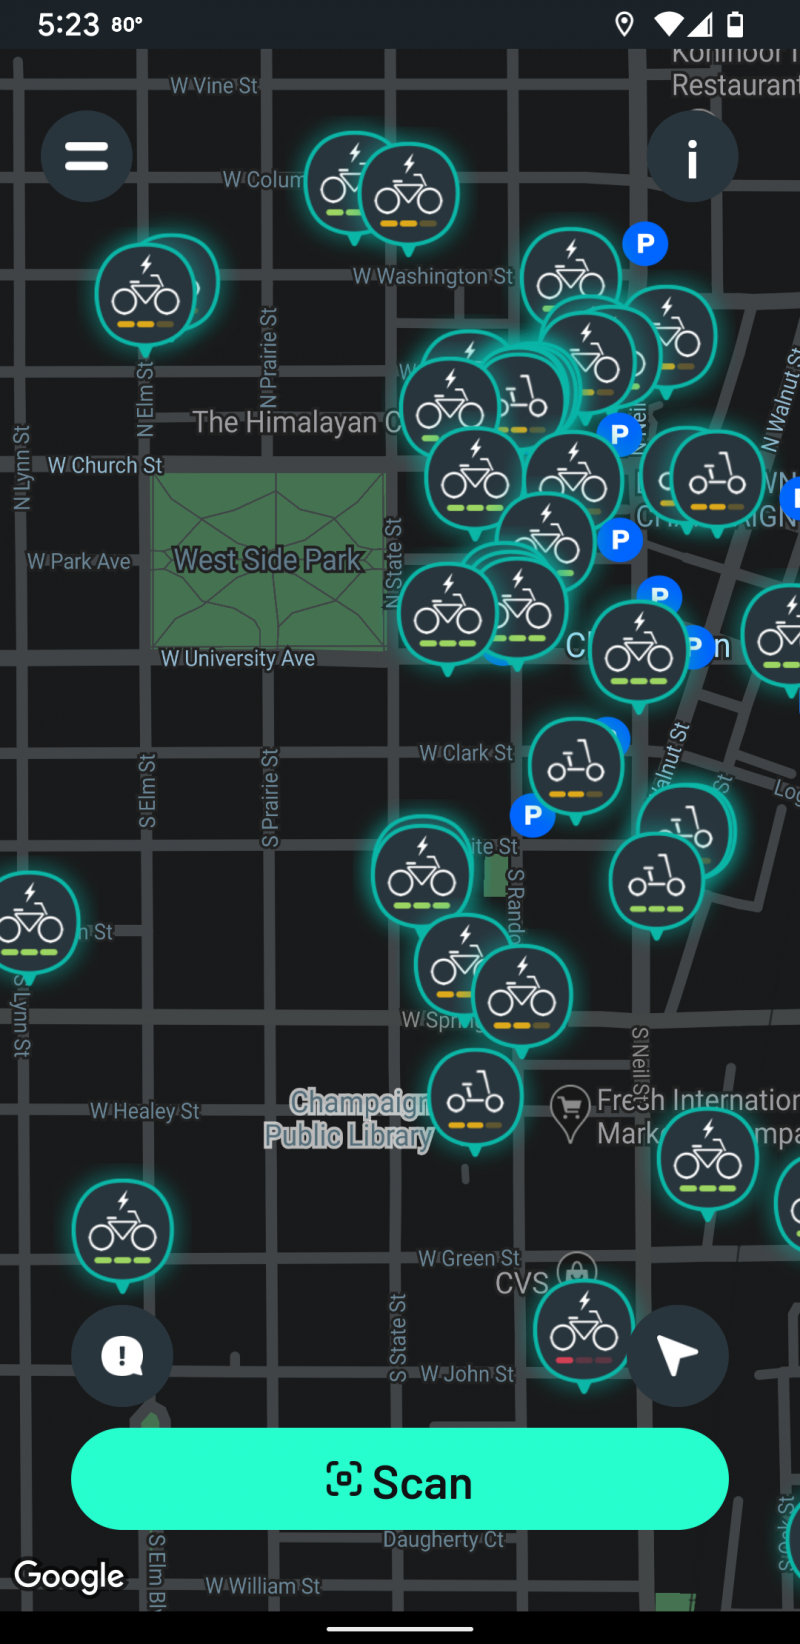 A section of a Google map with a black background and labeled streets. There are several icons on the map with a bicycle image. Image from Veo app.